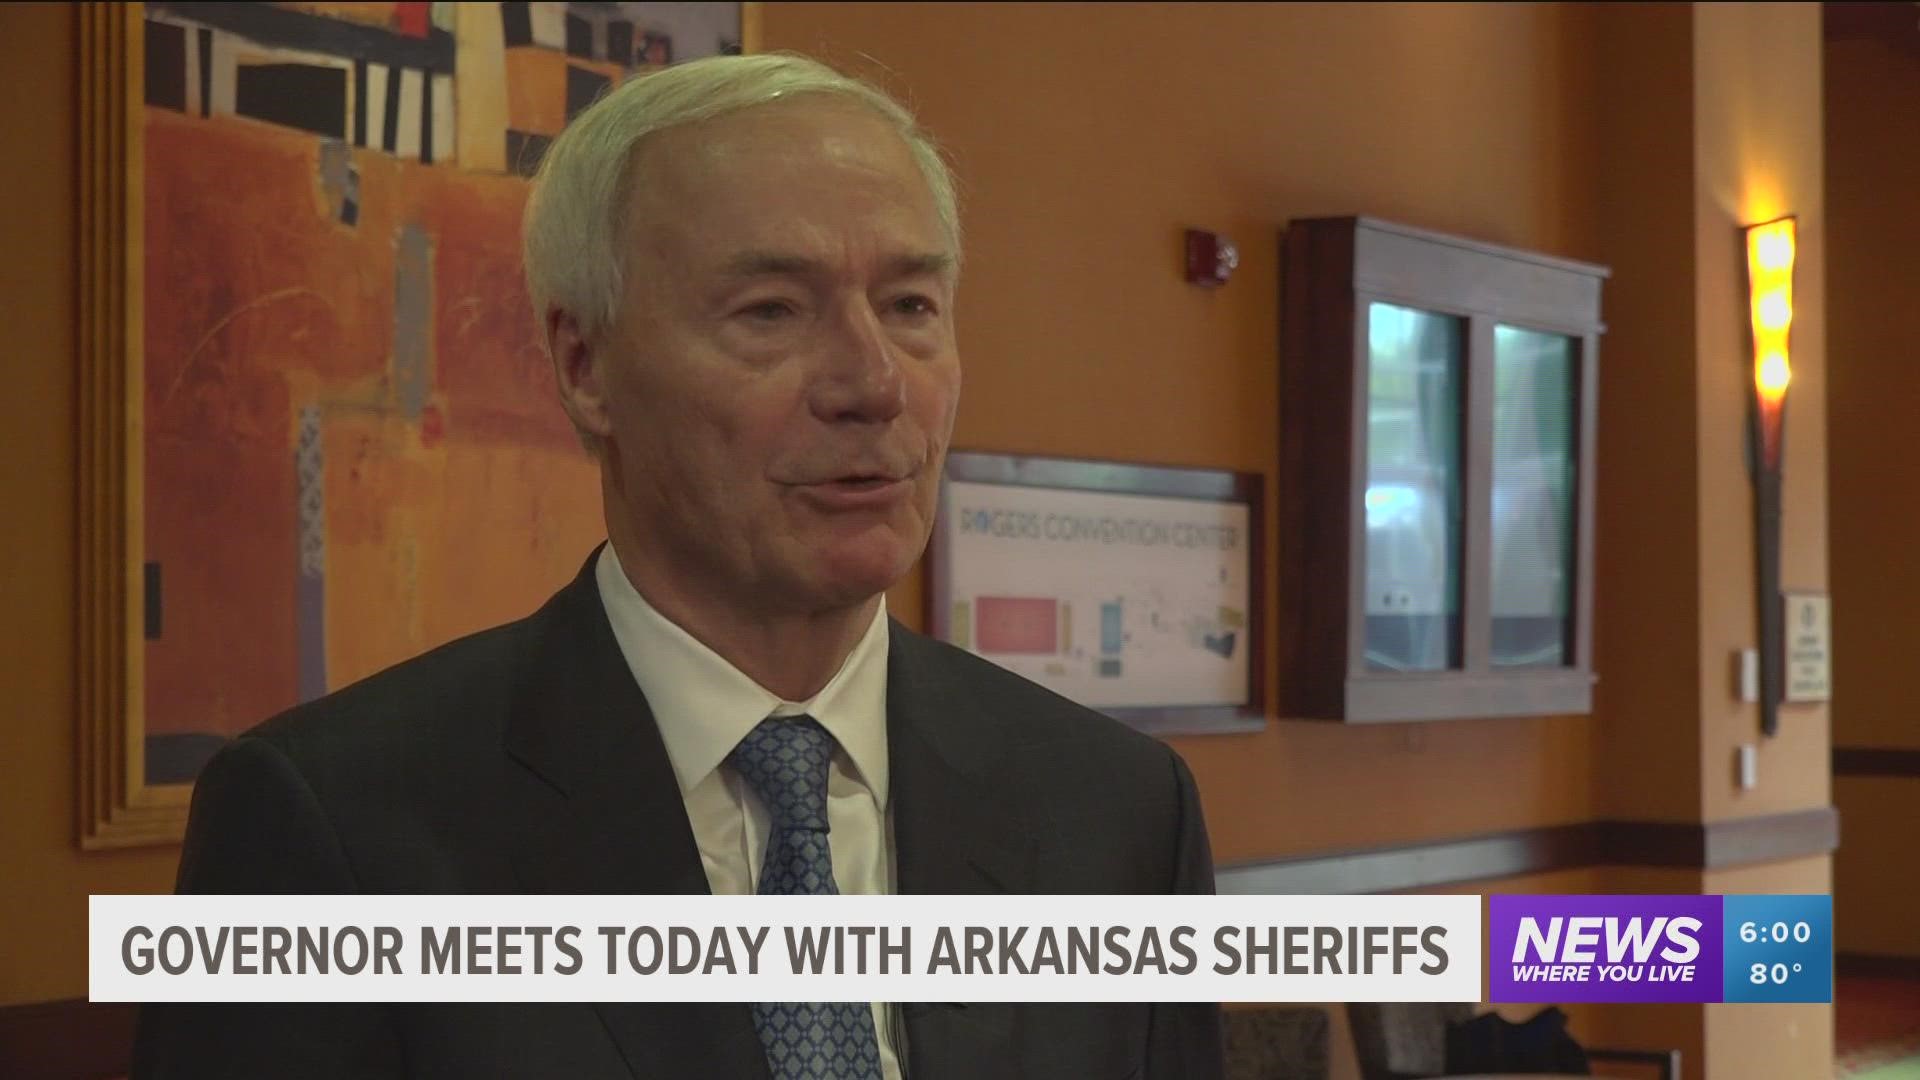 Governor Asa Hutchinson spoke at the Arkansas Sheriff's Association to push for increased school security in the state.